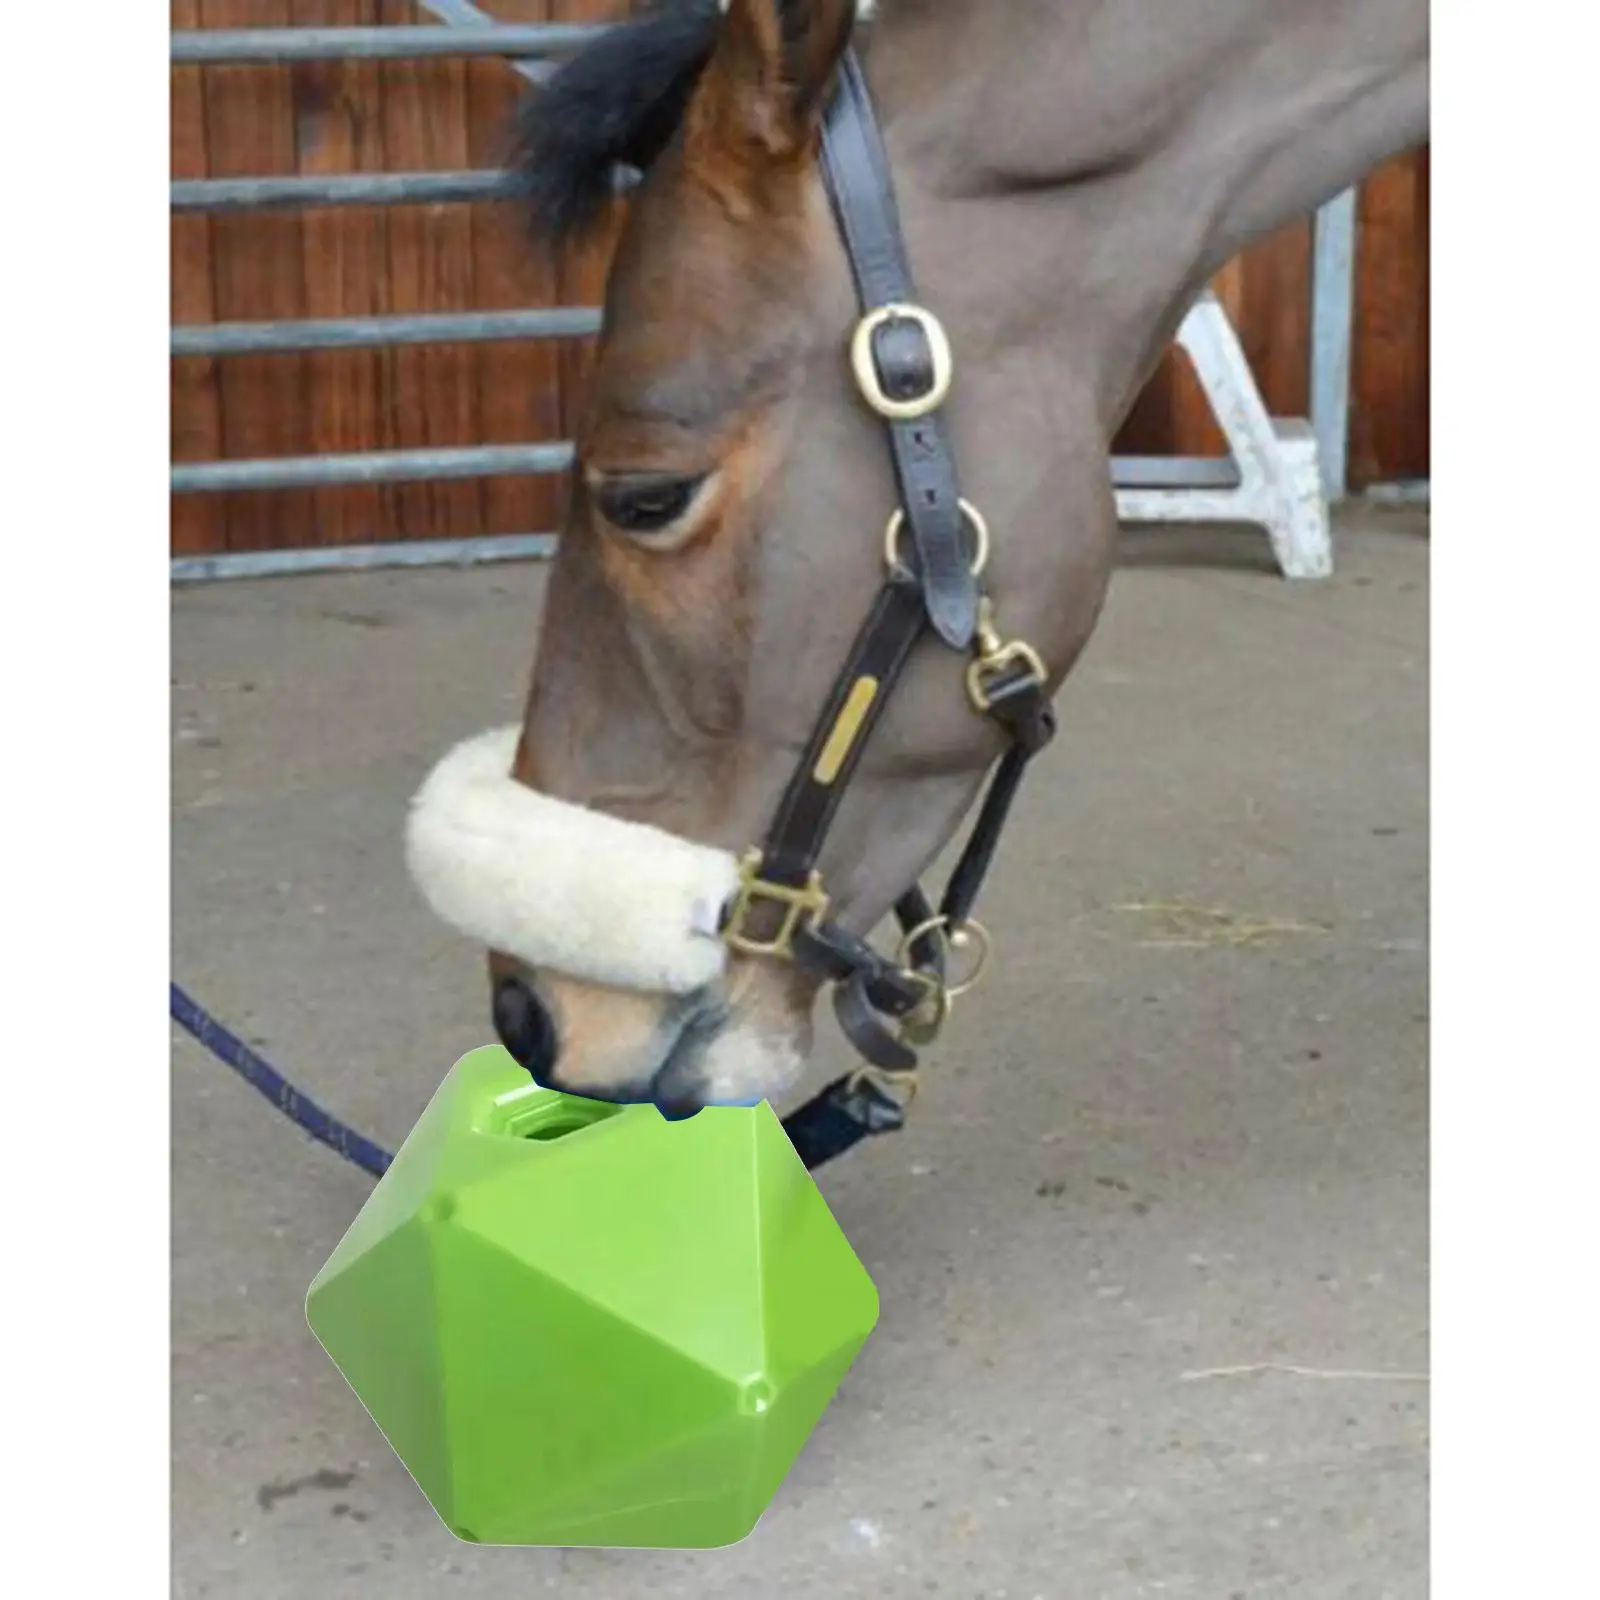 Funny Horse Treat Ball Feeding Toys Accessories Relieve Boredom Stress Play Snack Ball for Equine Sheep Farmhouse Lawn